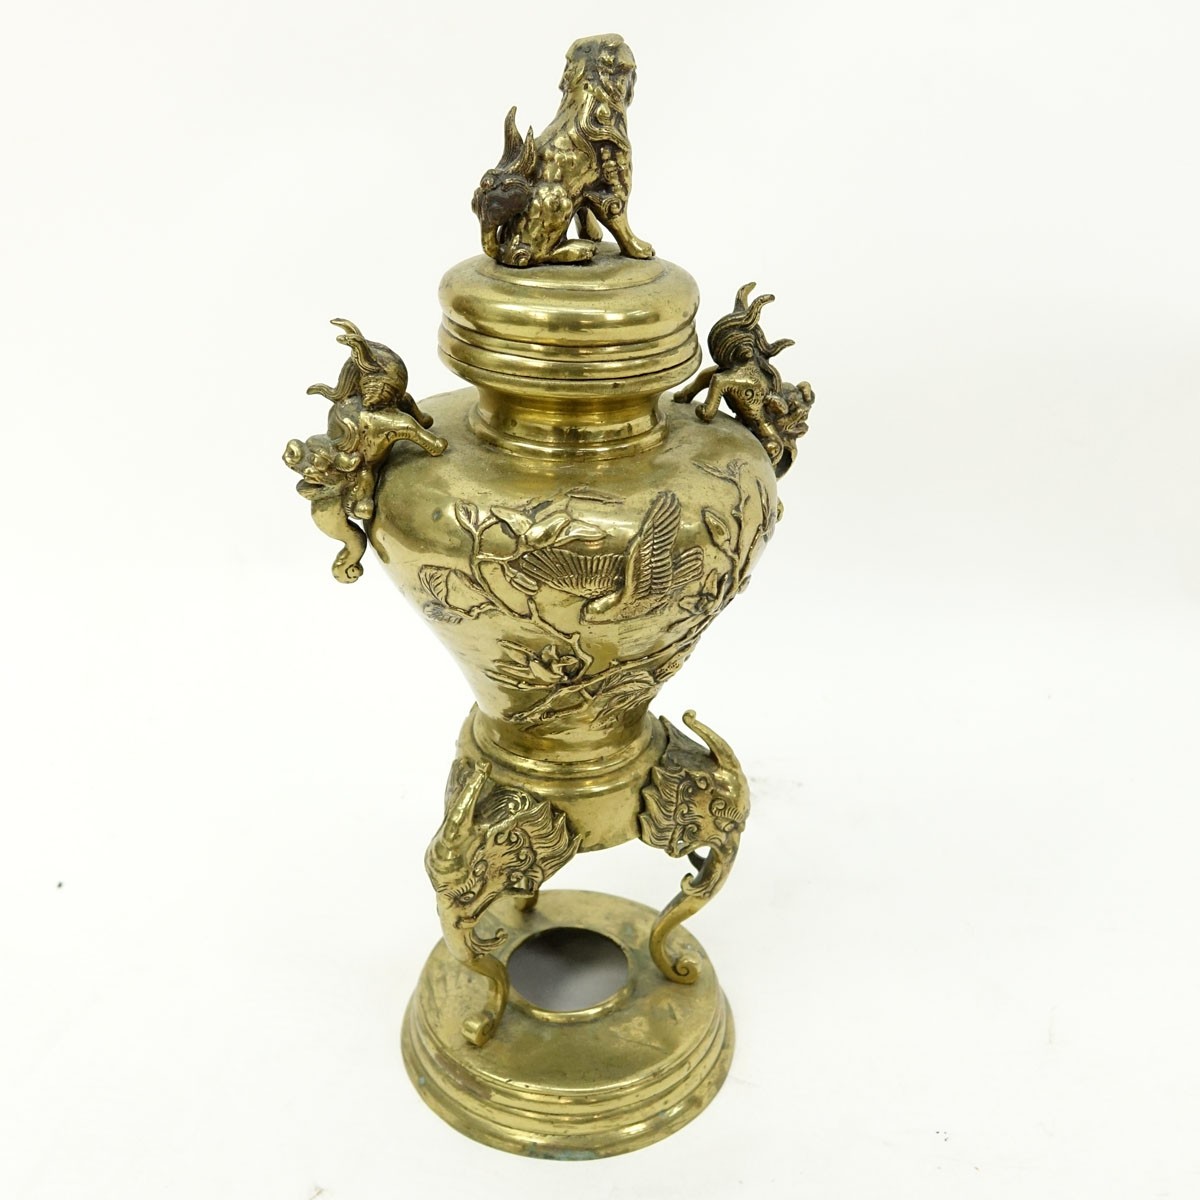 Antique Japanese Gilt Bronze High Standing Incense Burner with Foo Dog Finial. Raised birds and flowers relief, with figural handles.